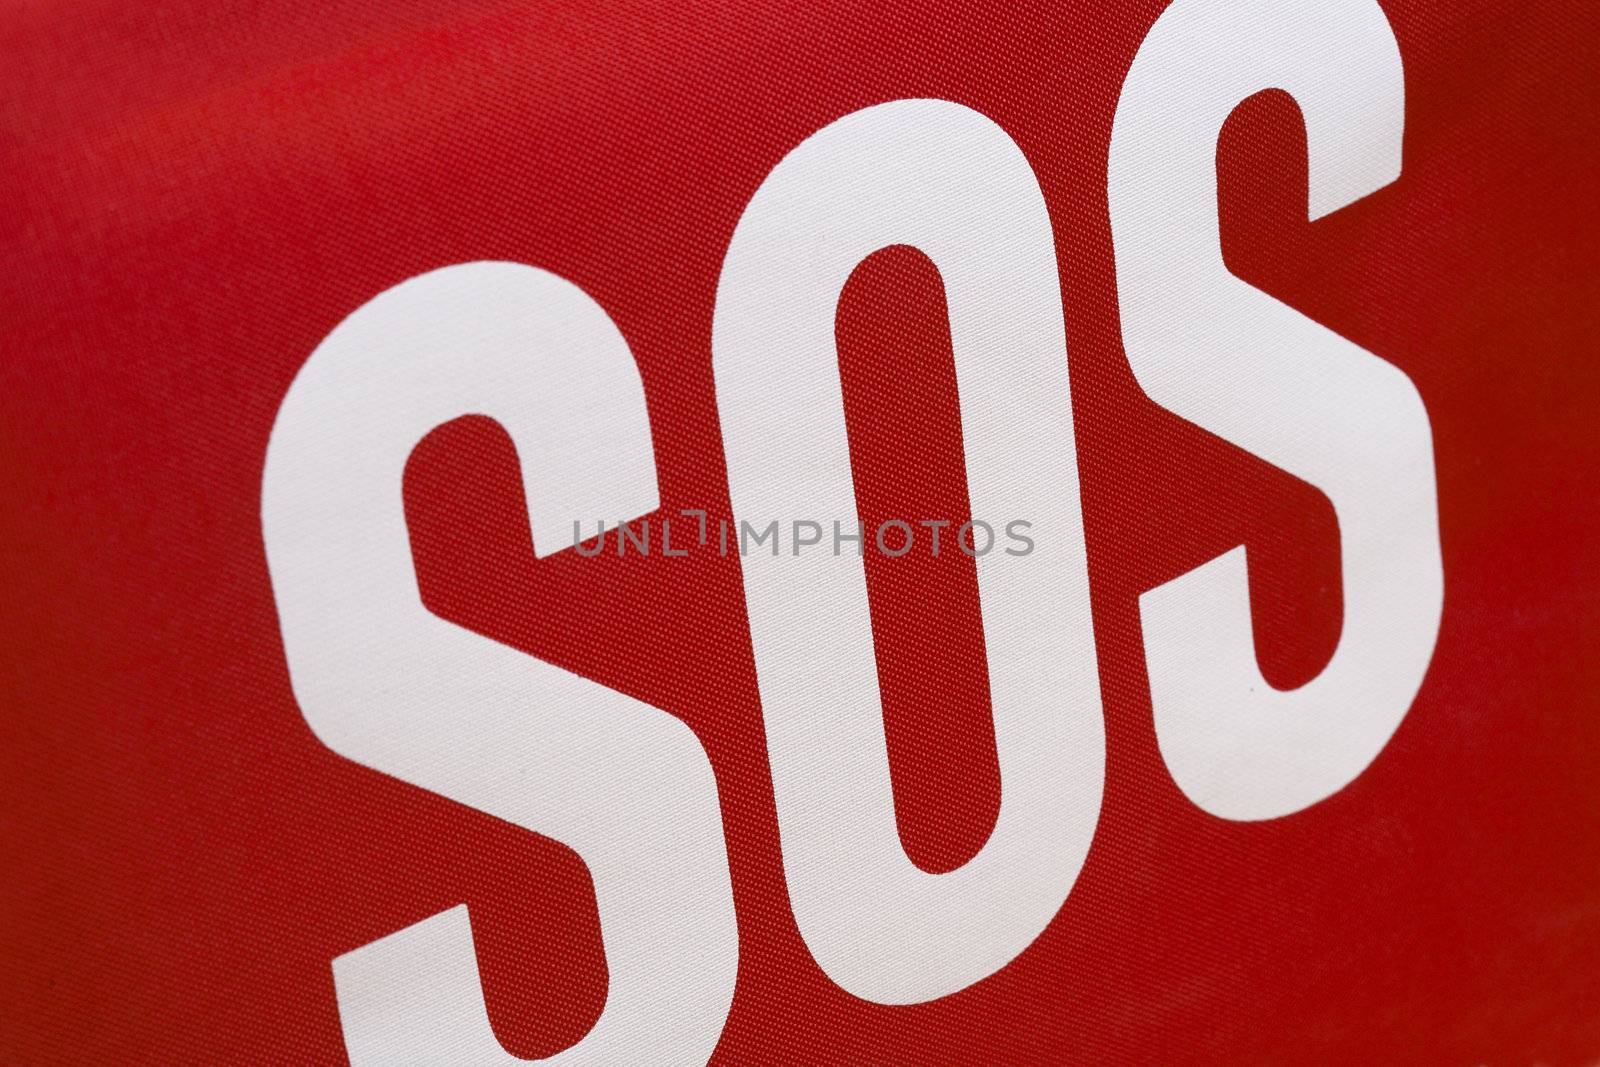 SOS by Stocksnapper